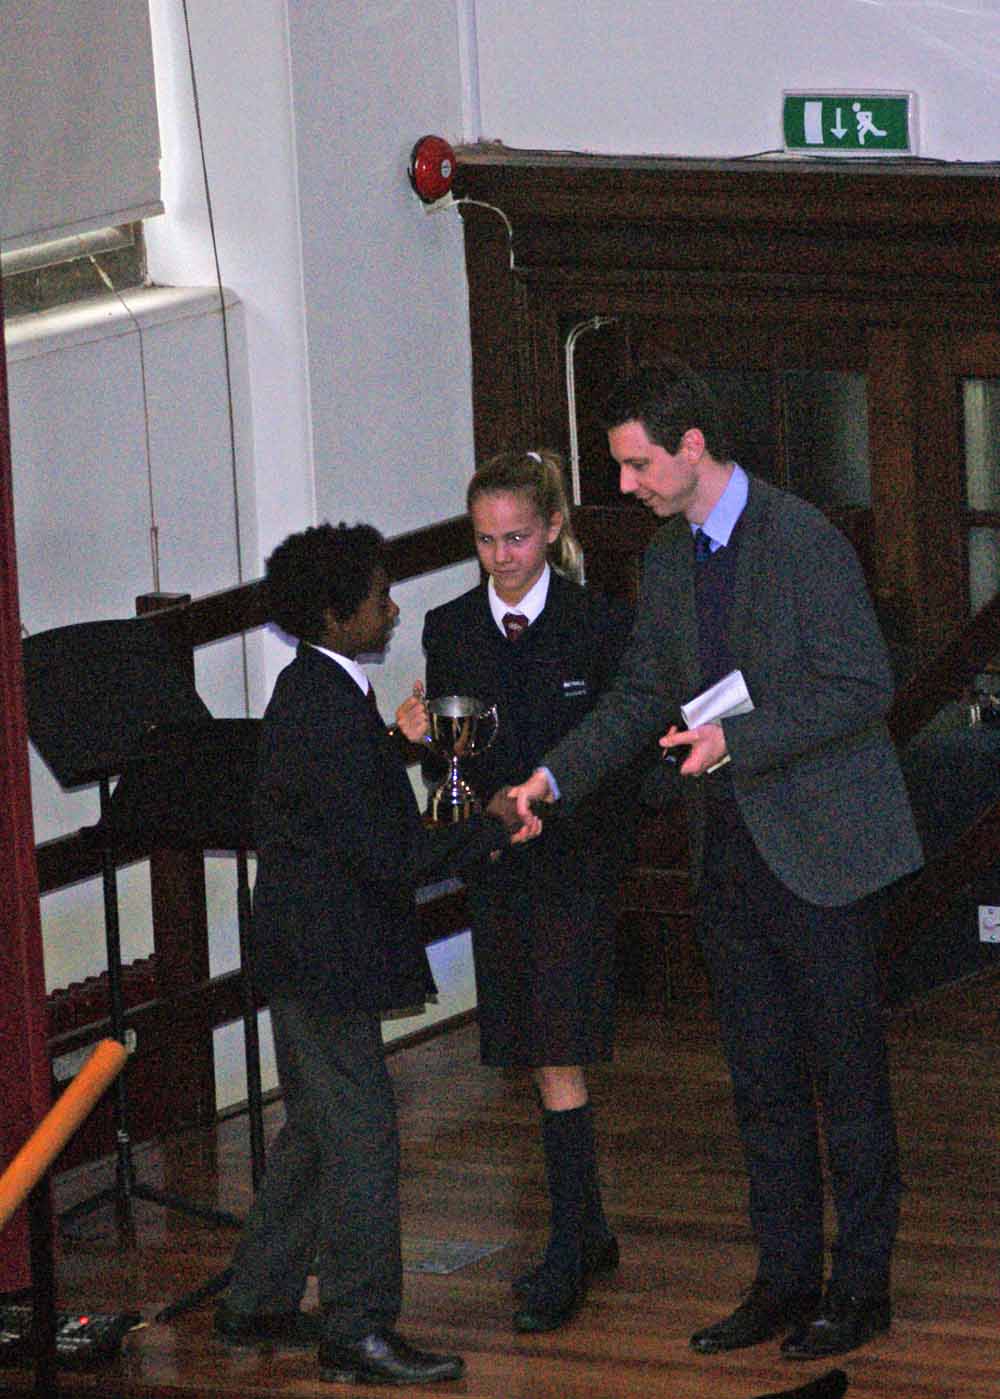 2015 Prep School House Singing Competition - Boulton crowned winners